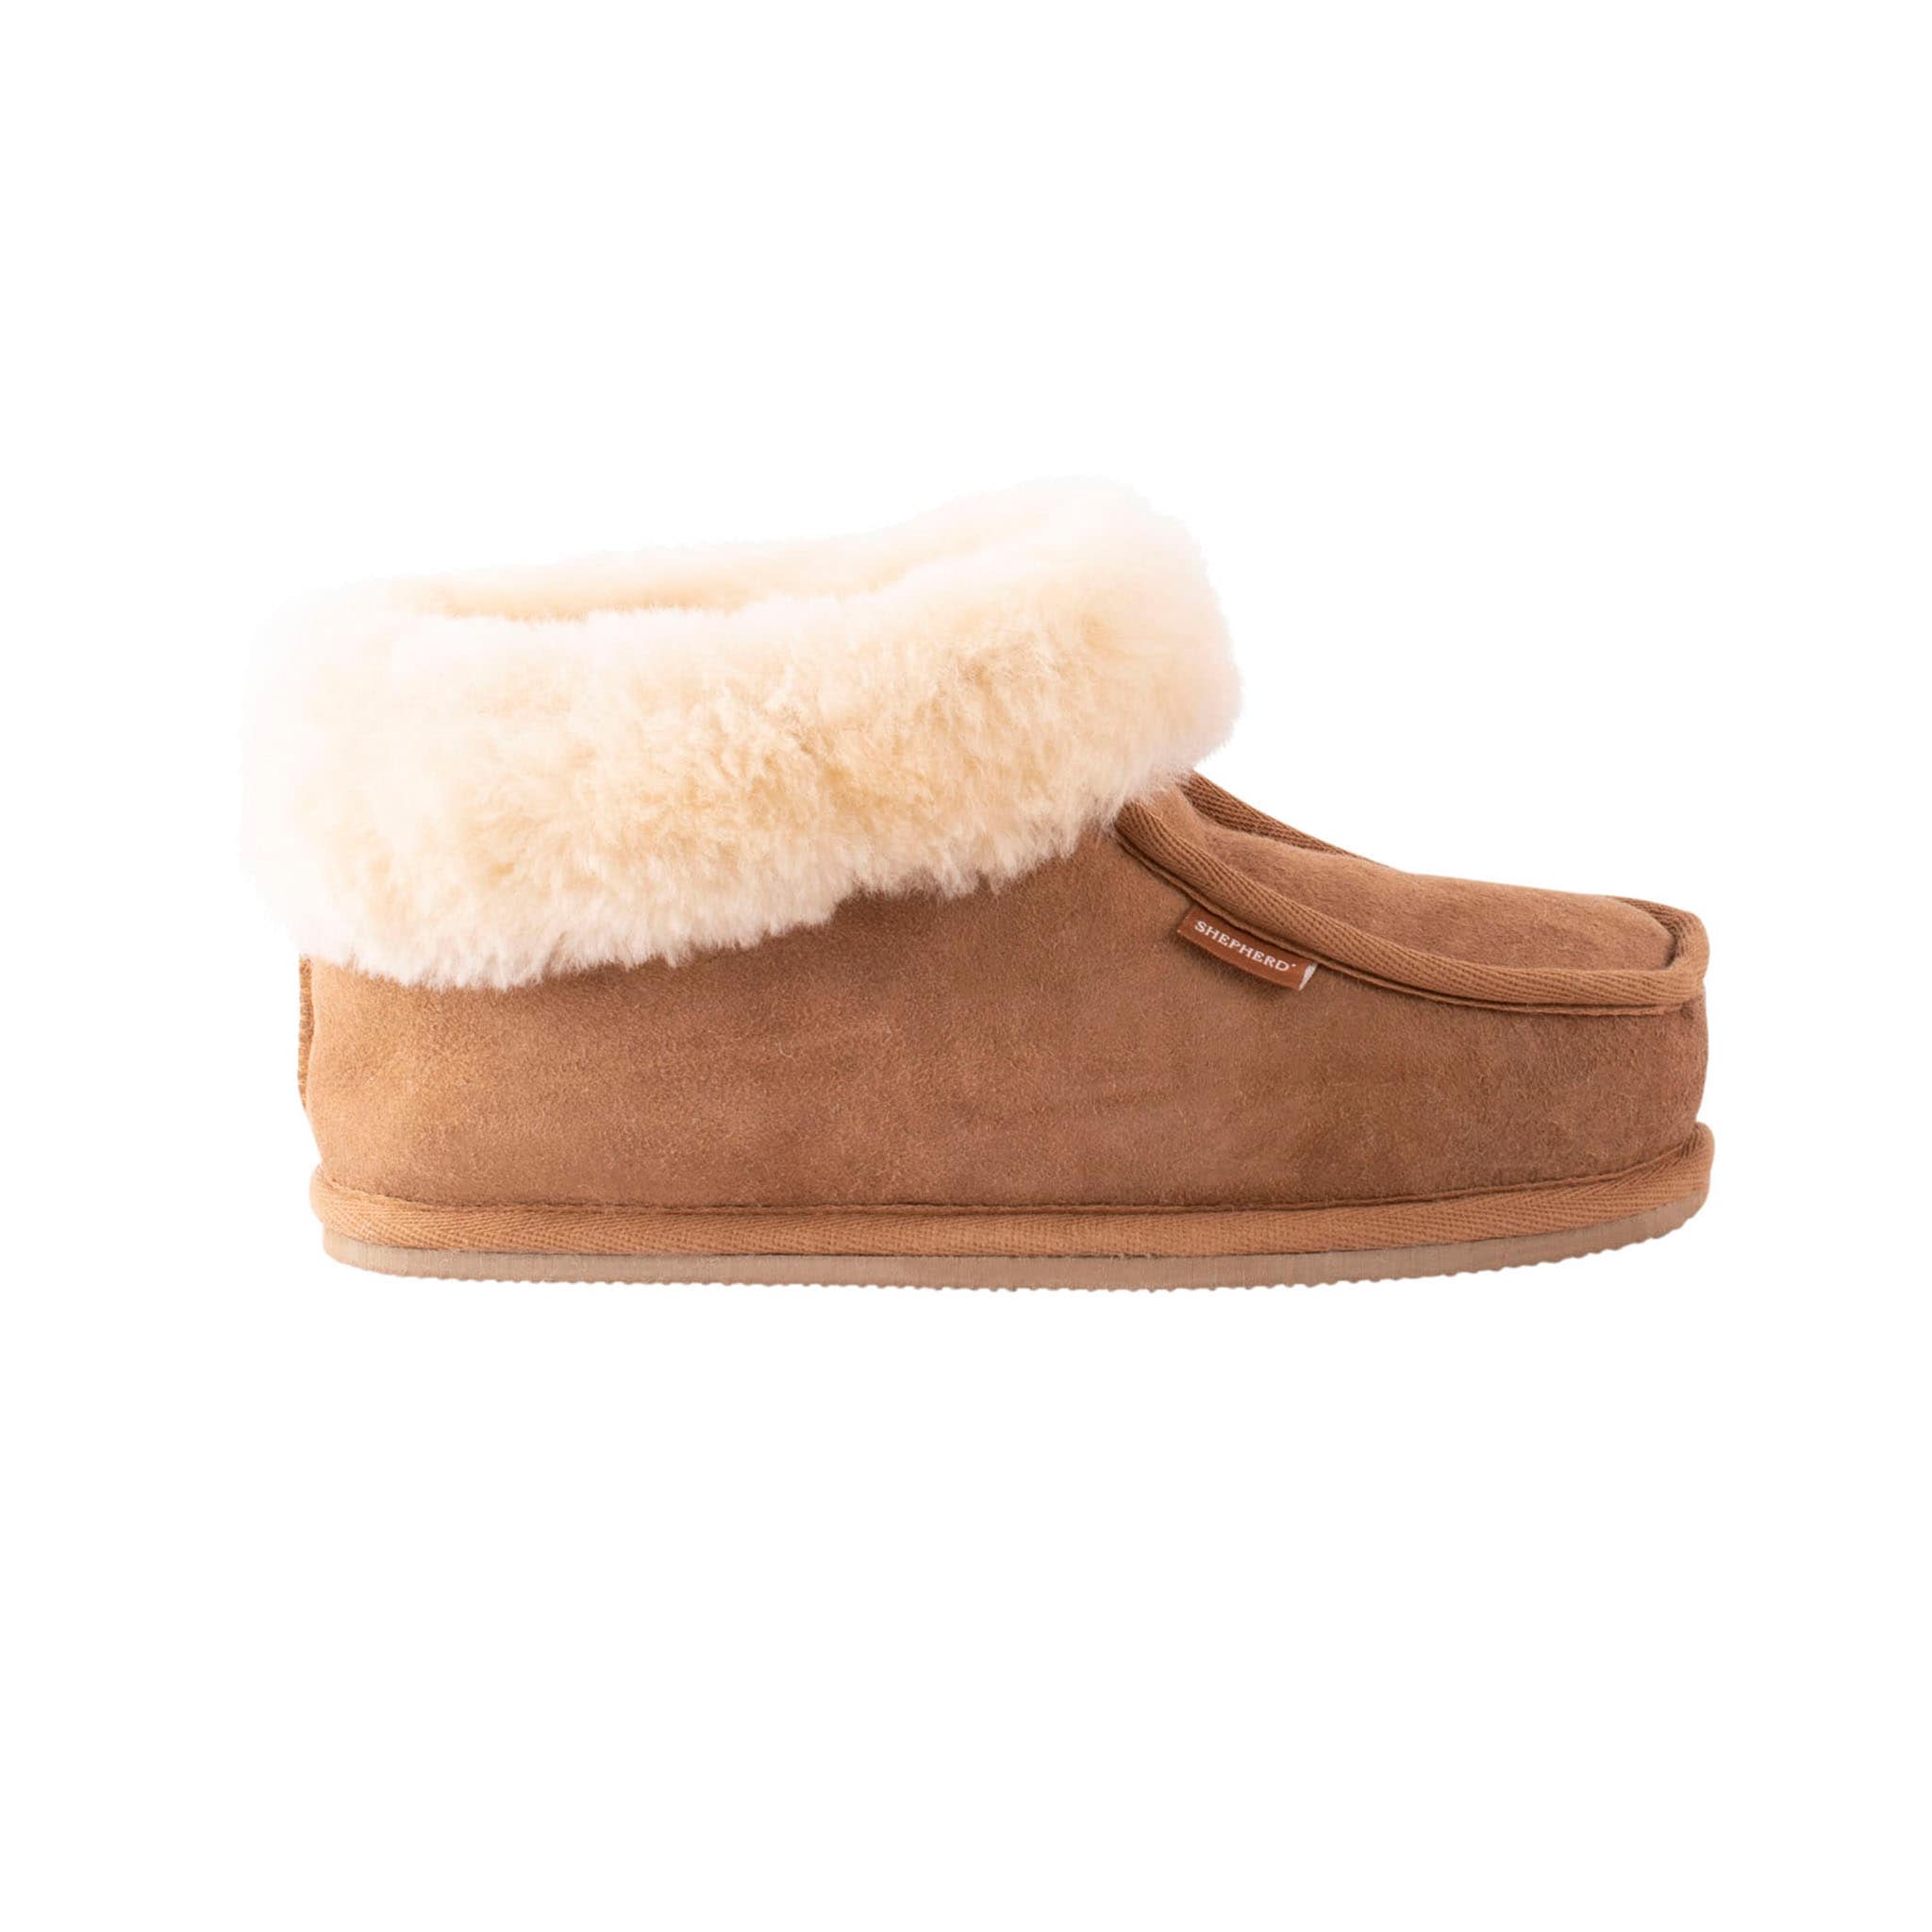 Shepherd Lena. Soft and warming ankle-high slippers.